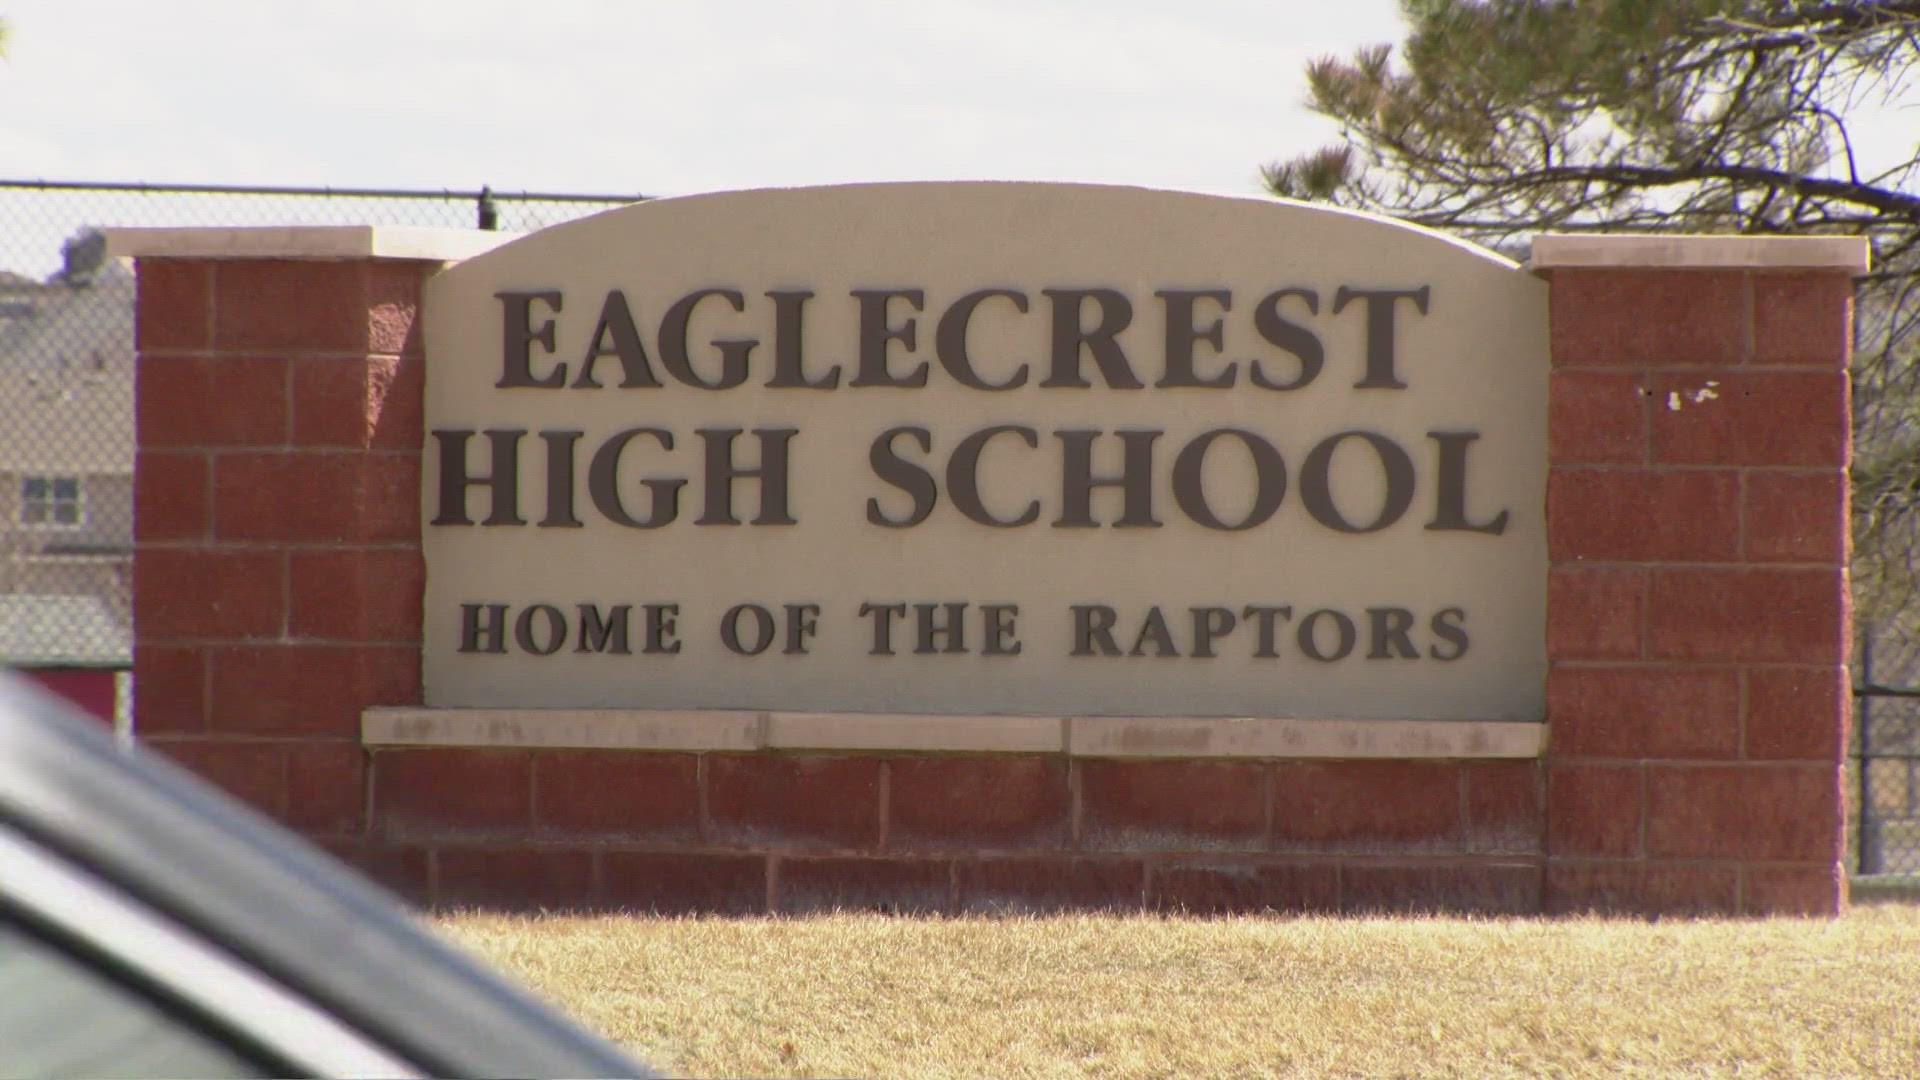 An ILC Para at Eaglecrest High School also died over the weekend, but it is not known at this time whether her death is connected.